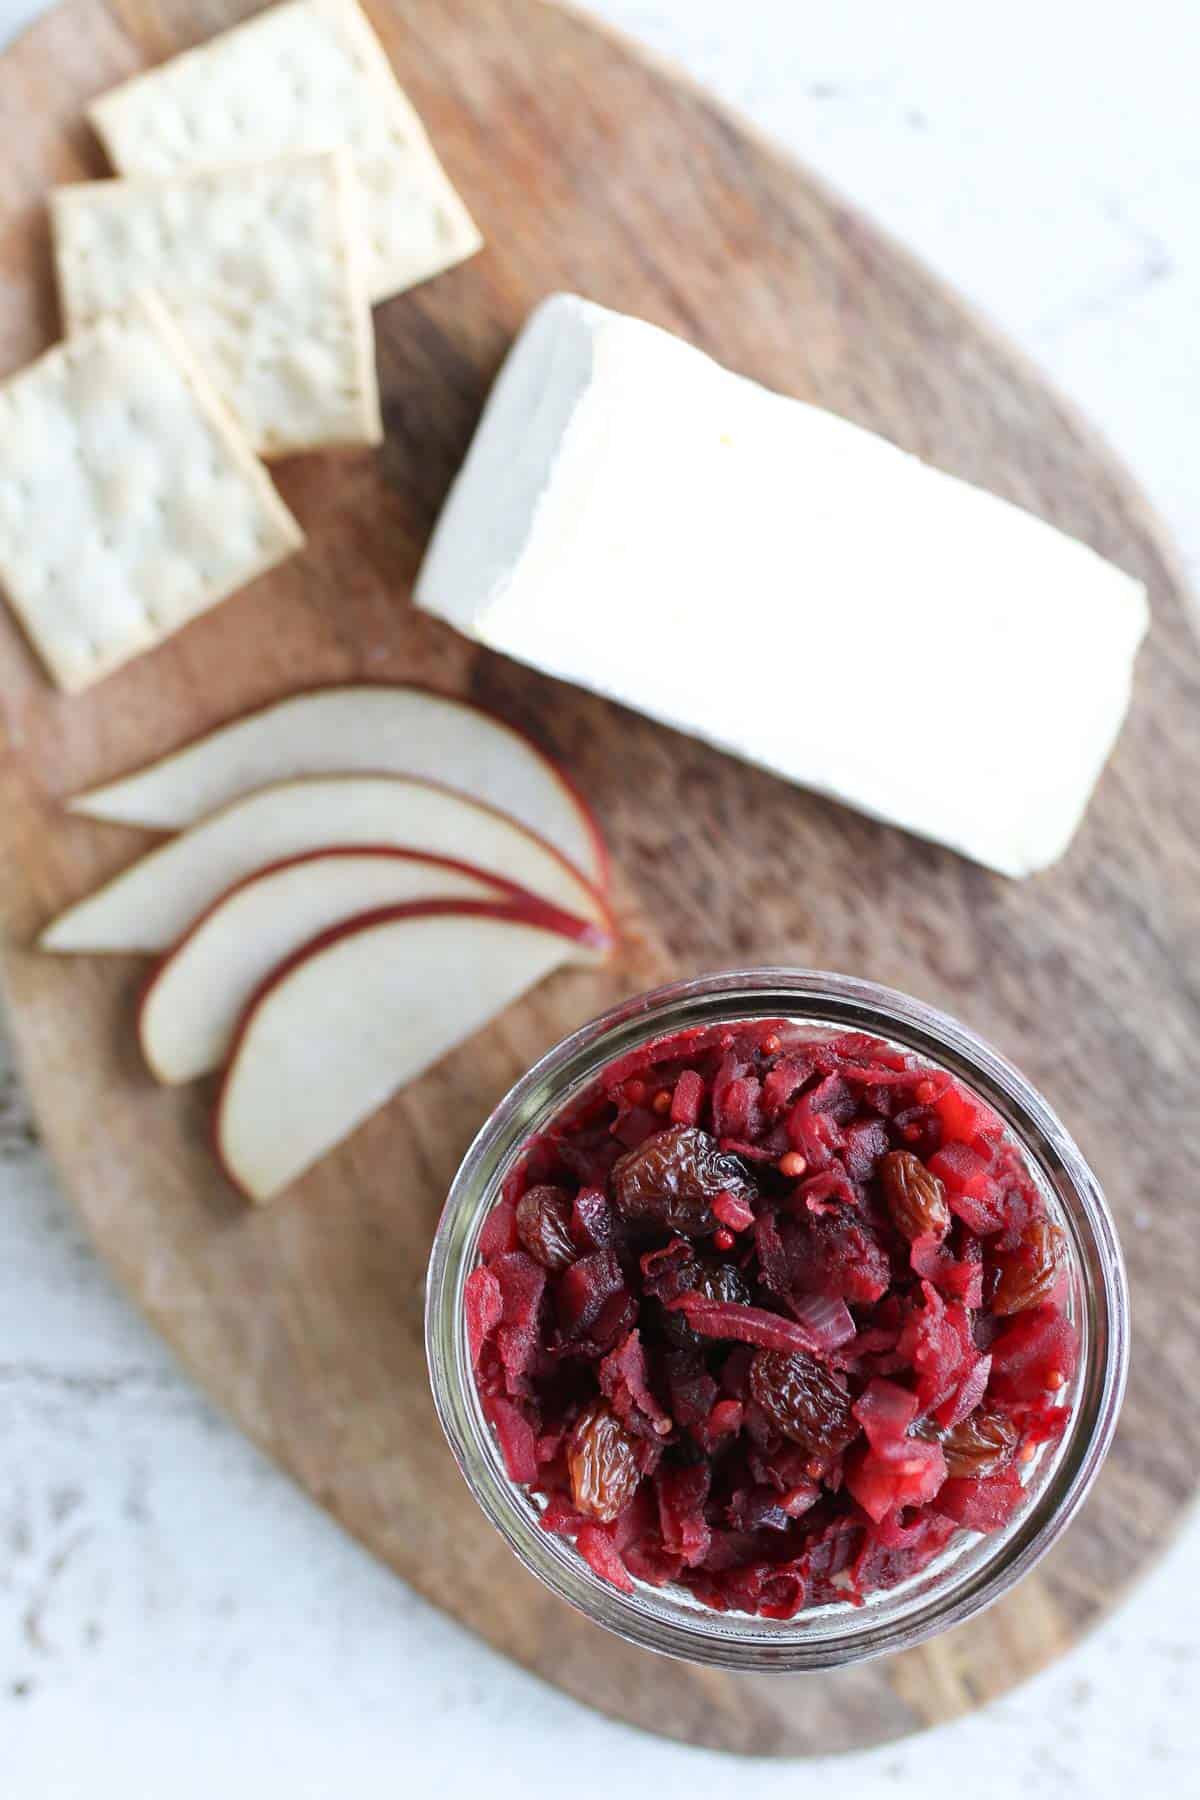 Birds eye view of apply chutney on a wooden board accompanied by cheese, slices red apple, and crackers. 